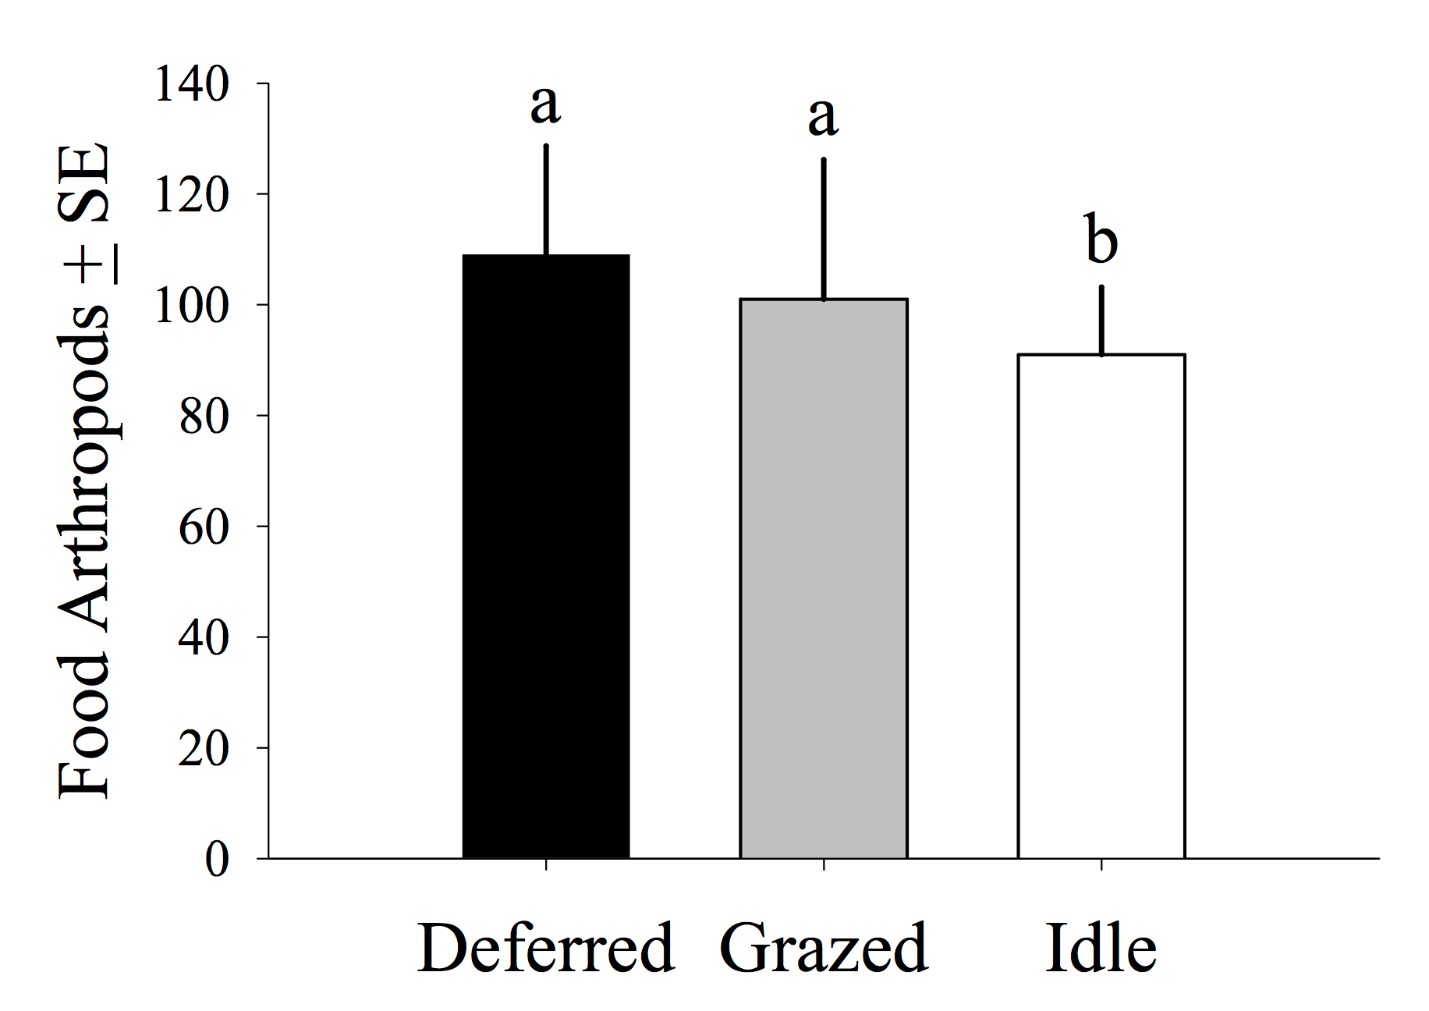 Activity-density of bird-food arthropods from samples collected in grazed, rested, and idled pastures during the 2012-2015 field season north of Lavina, Montana. Bars represent weekly catch least squared means, and error bars represent the standard error of the mean.